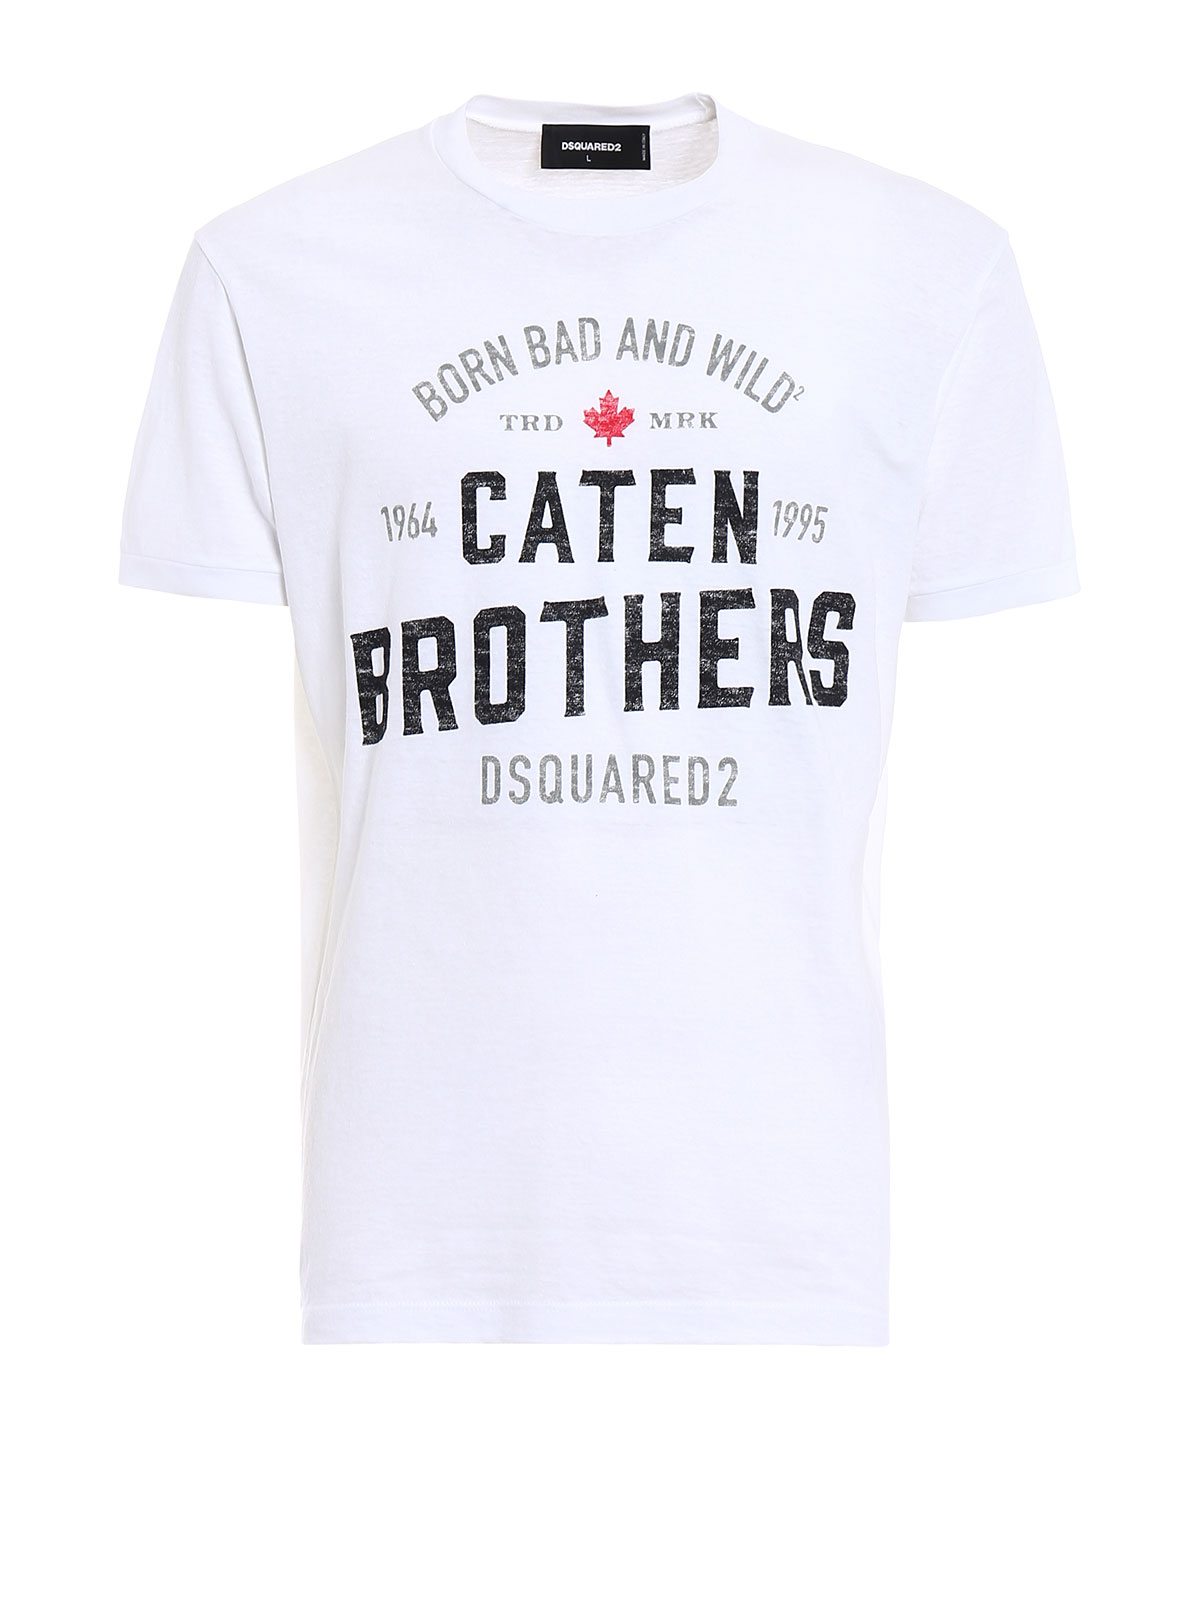 dsquared caten brothers pet